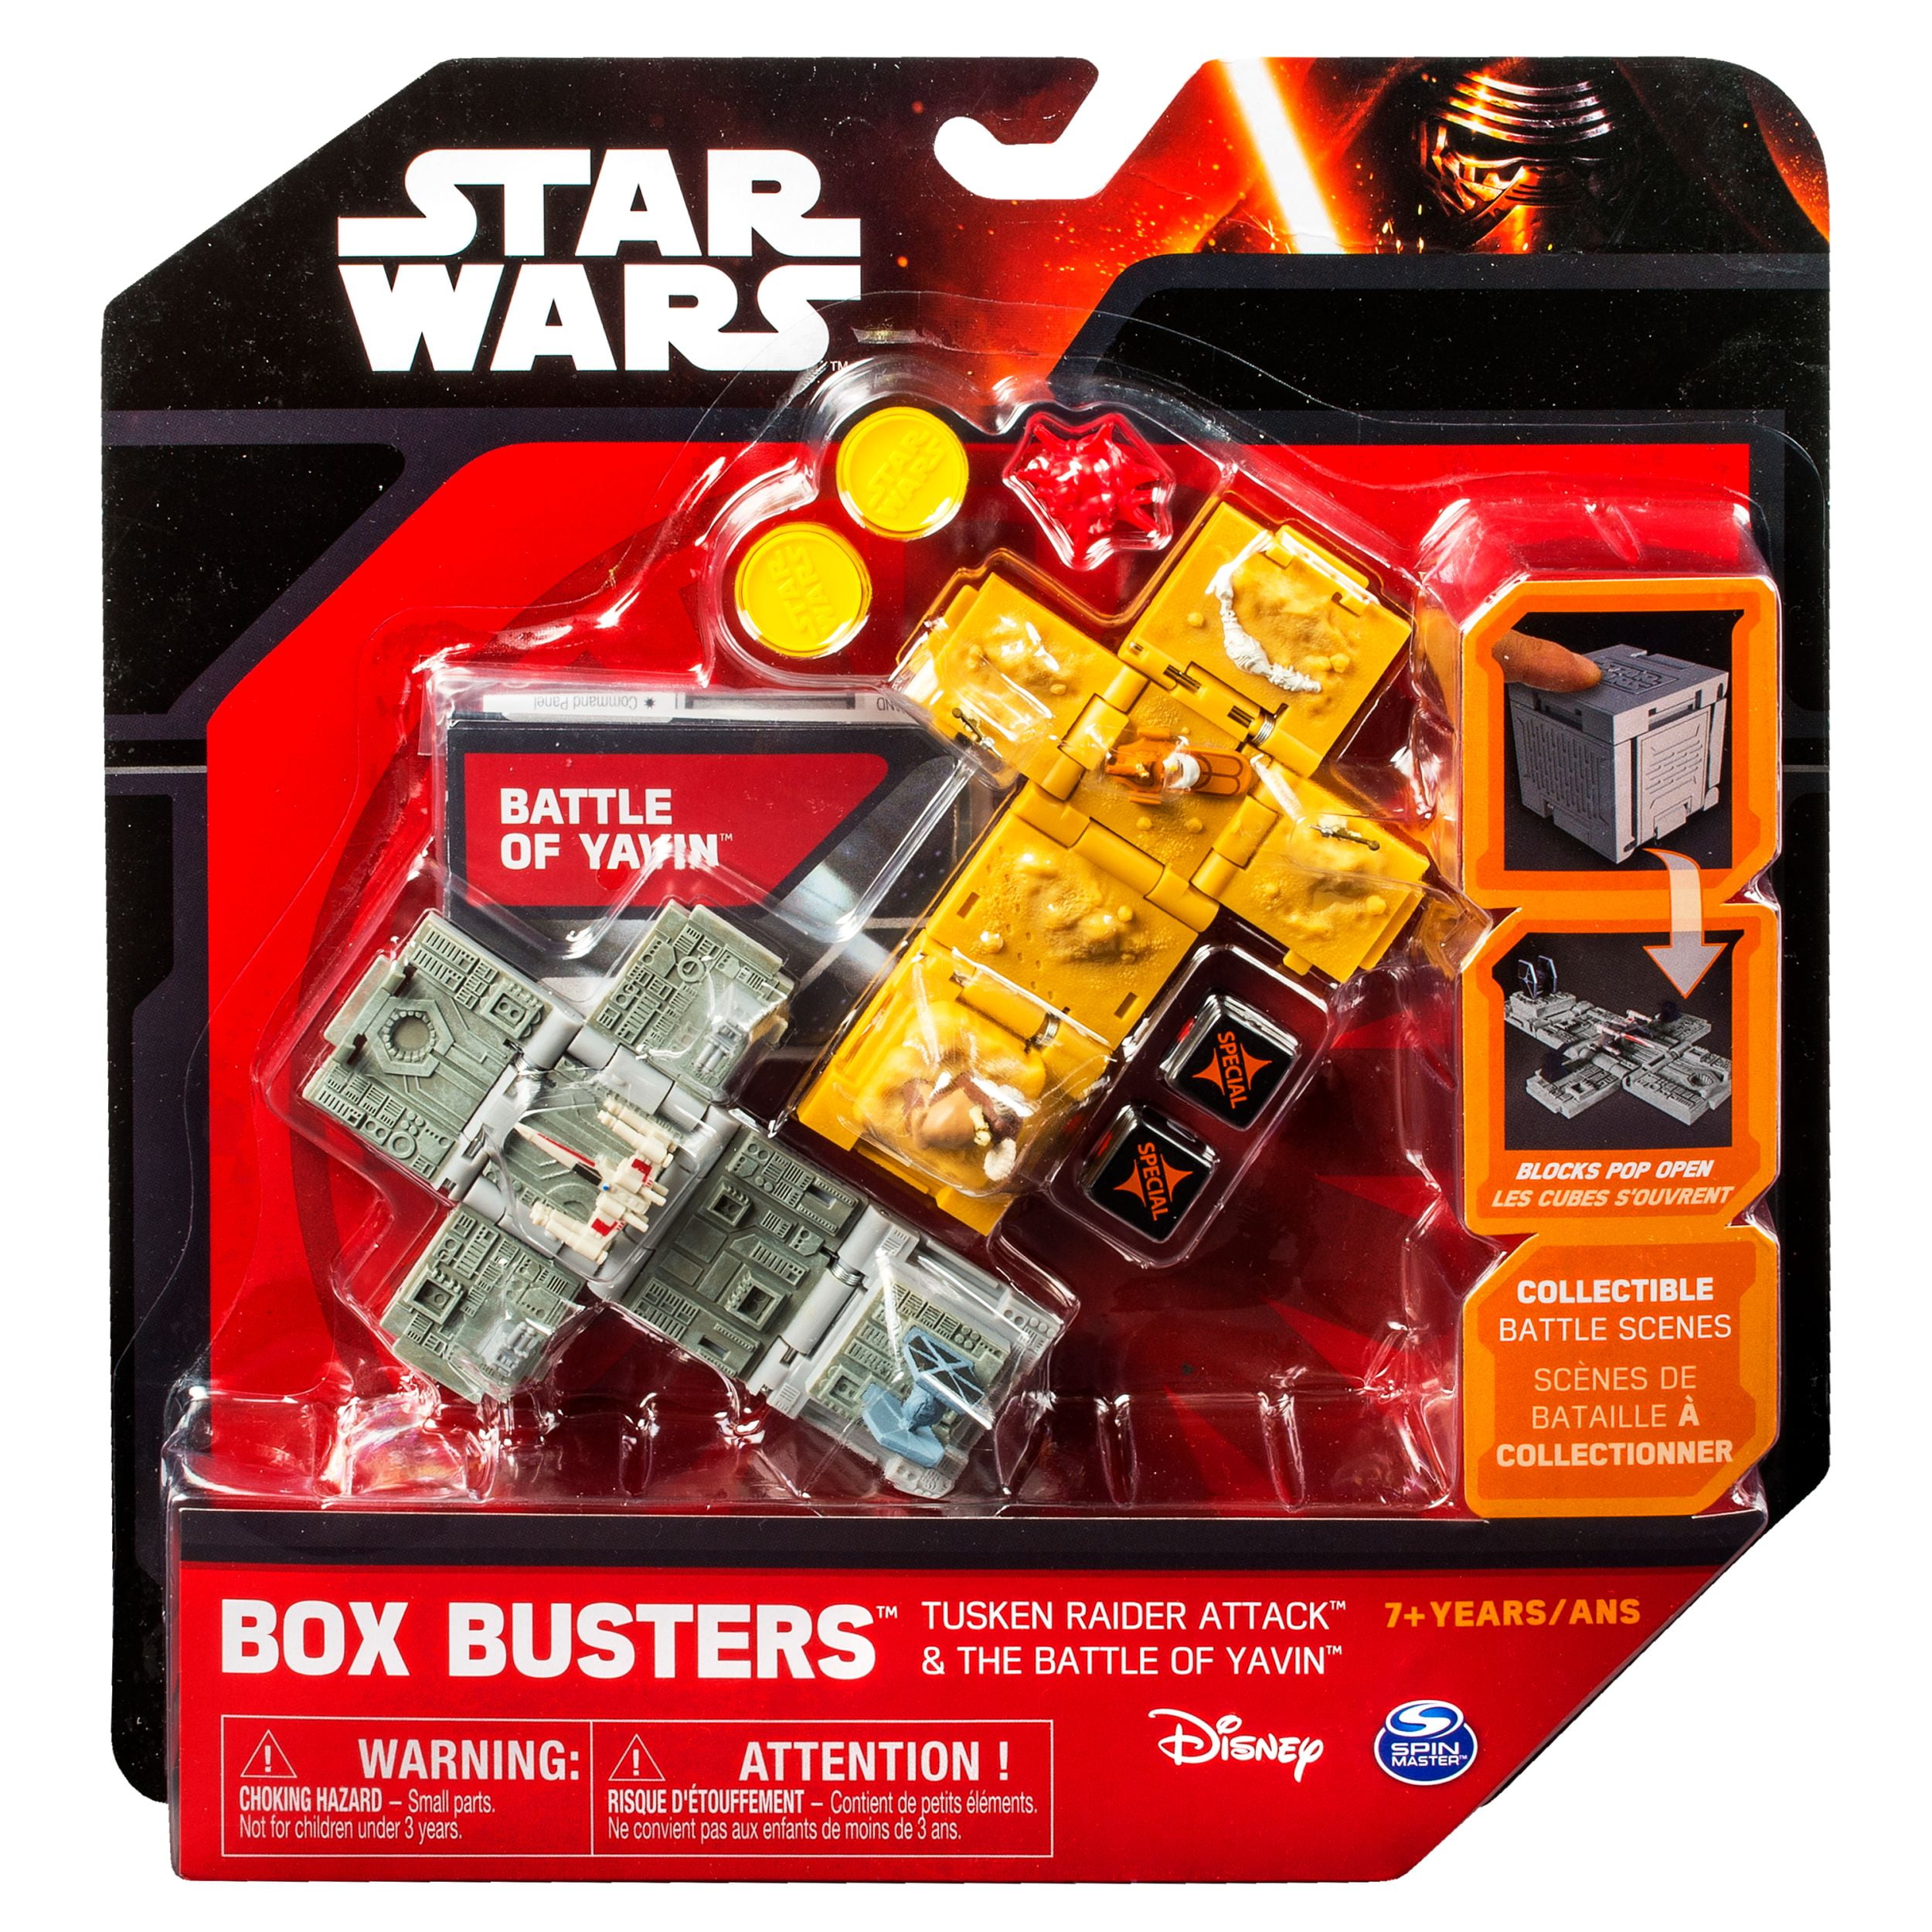 Details about   Star Wars Box Buster Battle of Naboo & Battle of Hoth Game New In Box 